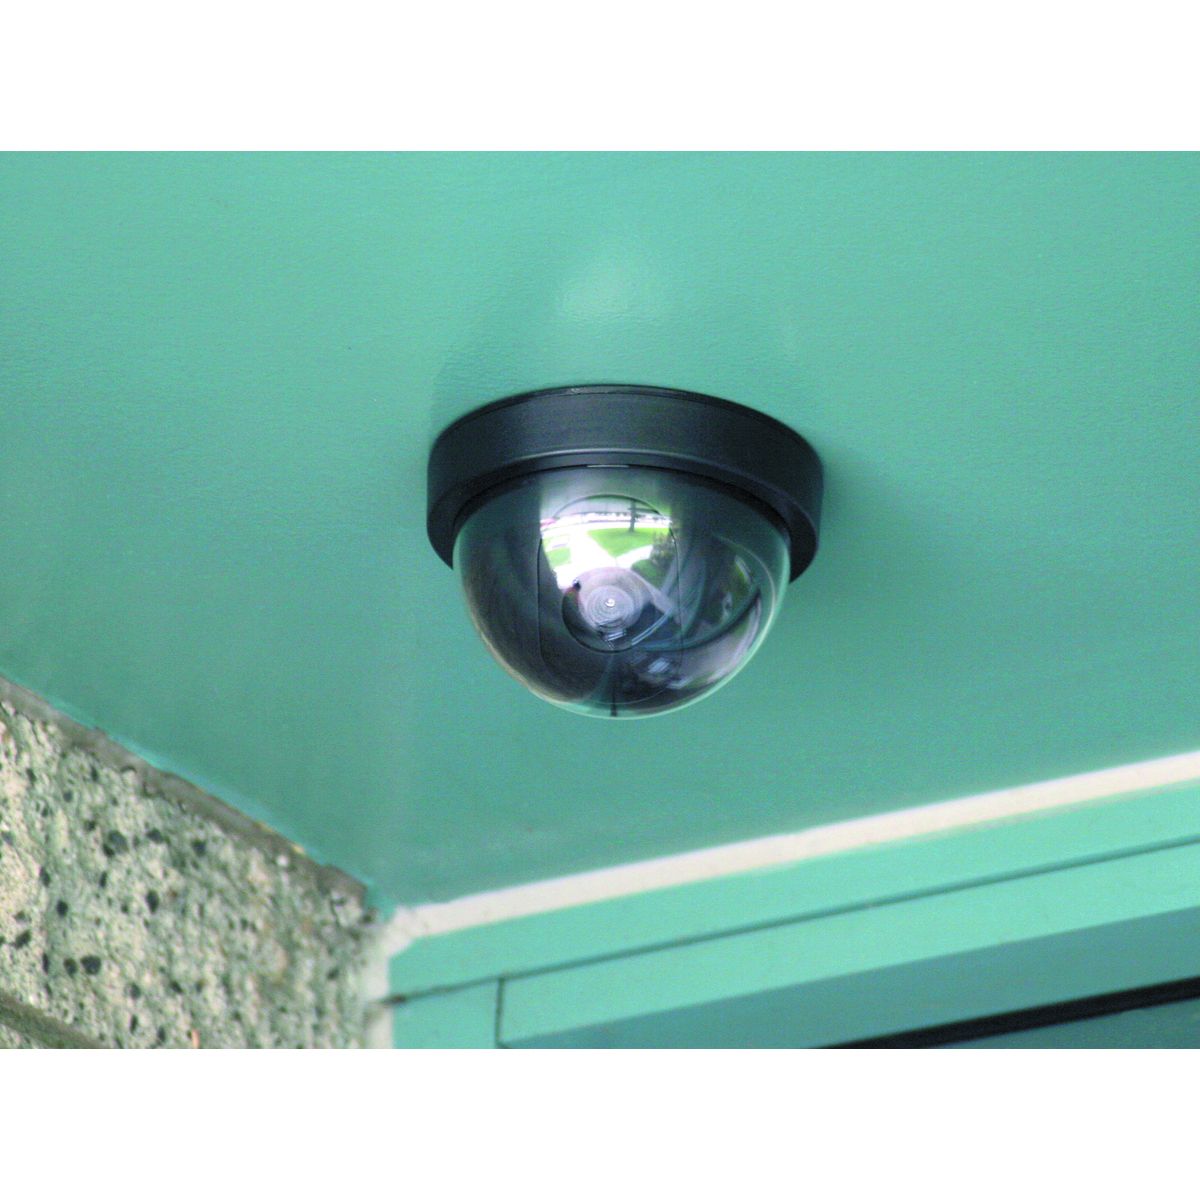 BUNKER HILL SECURITY Dummy Dome Security Camera with LED